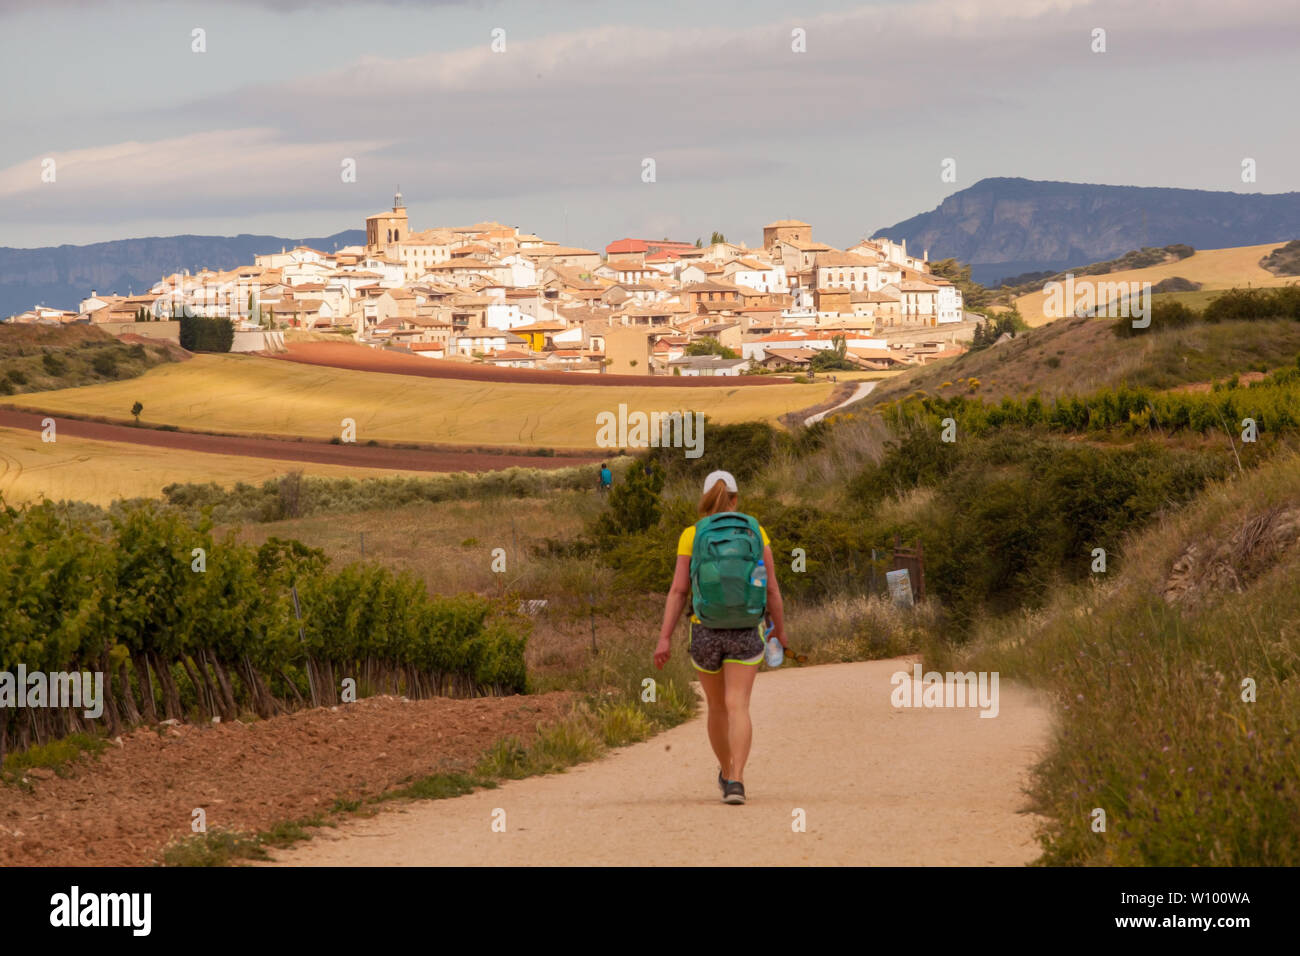 Woman  backpacker walking the Spanish pilgrim route the Camino de Santiago the Way of St James towards the village of Cirauqui in Navarra Spain Stock Photo